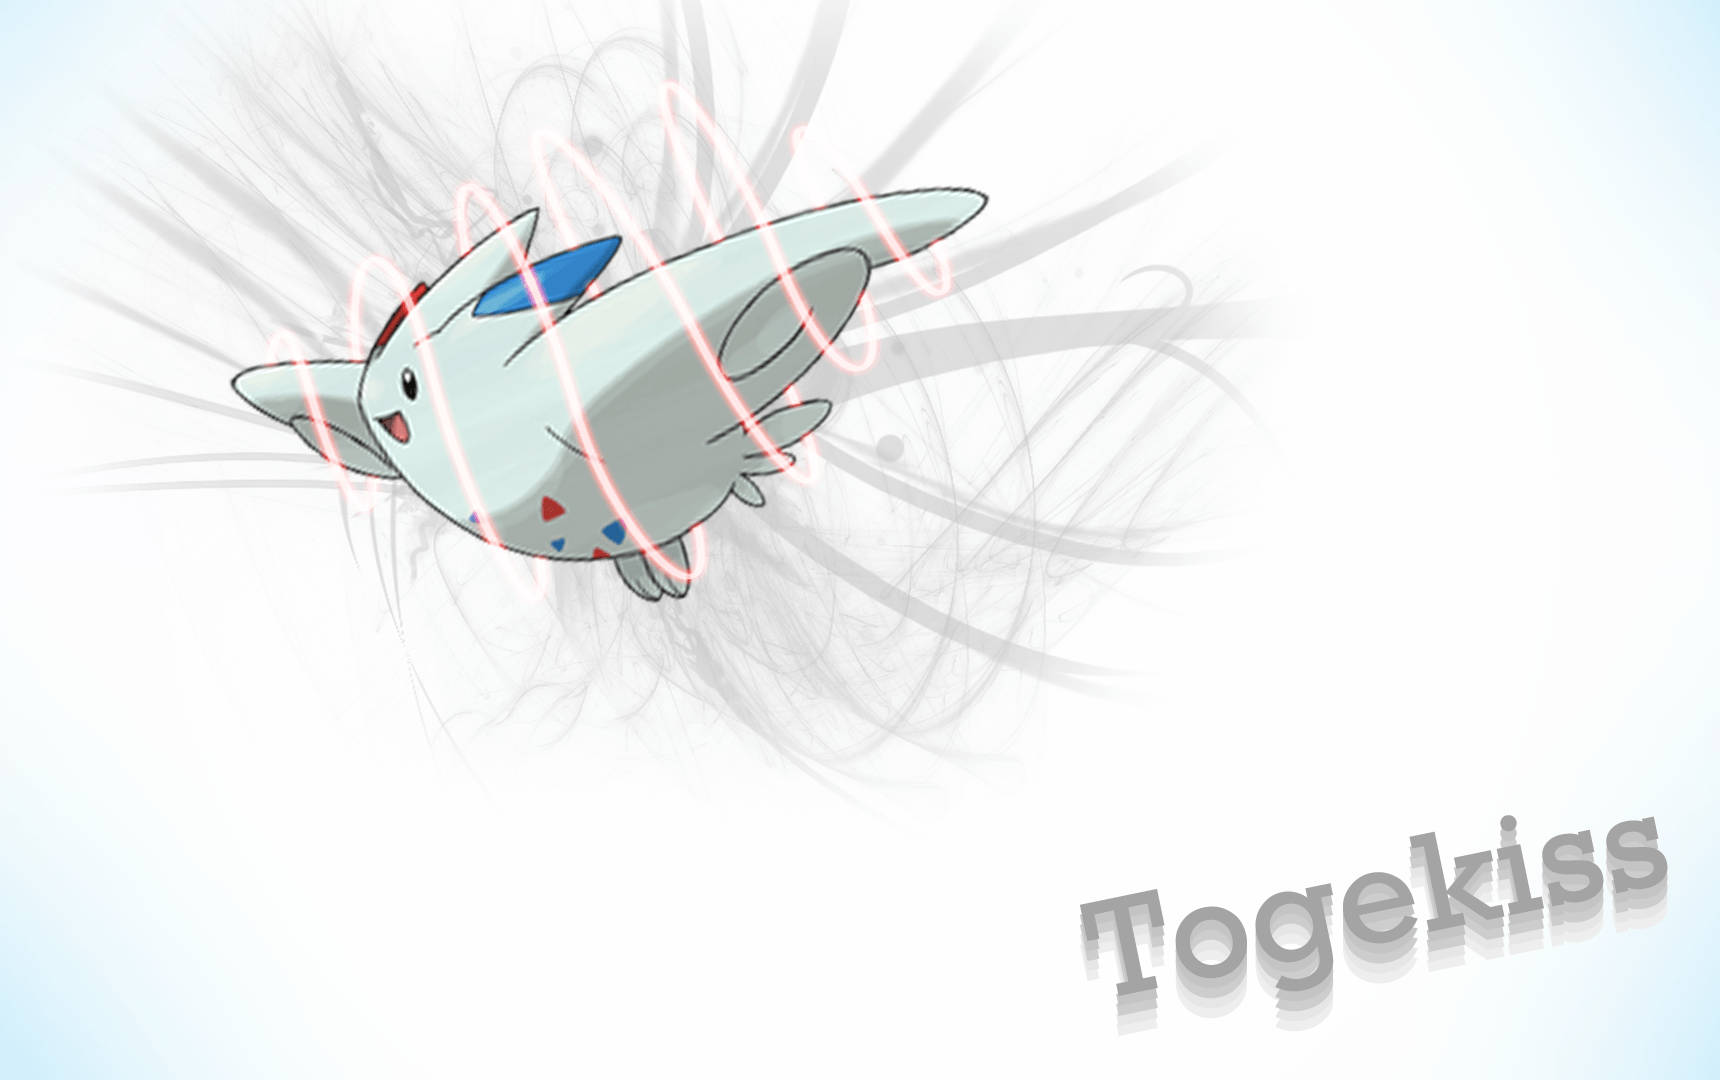 Togekiss Name Picture